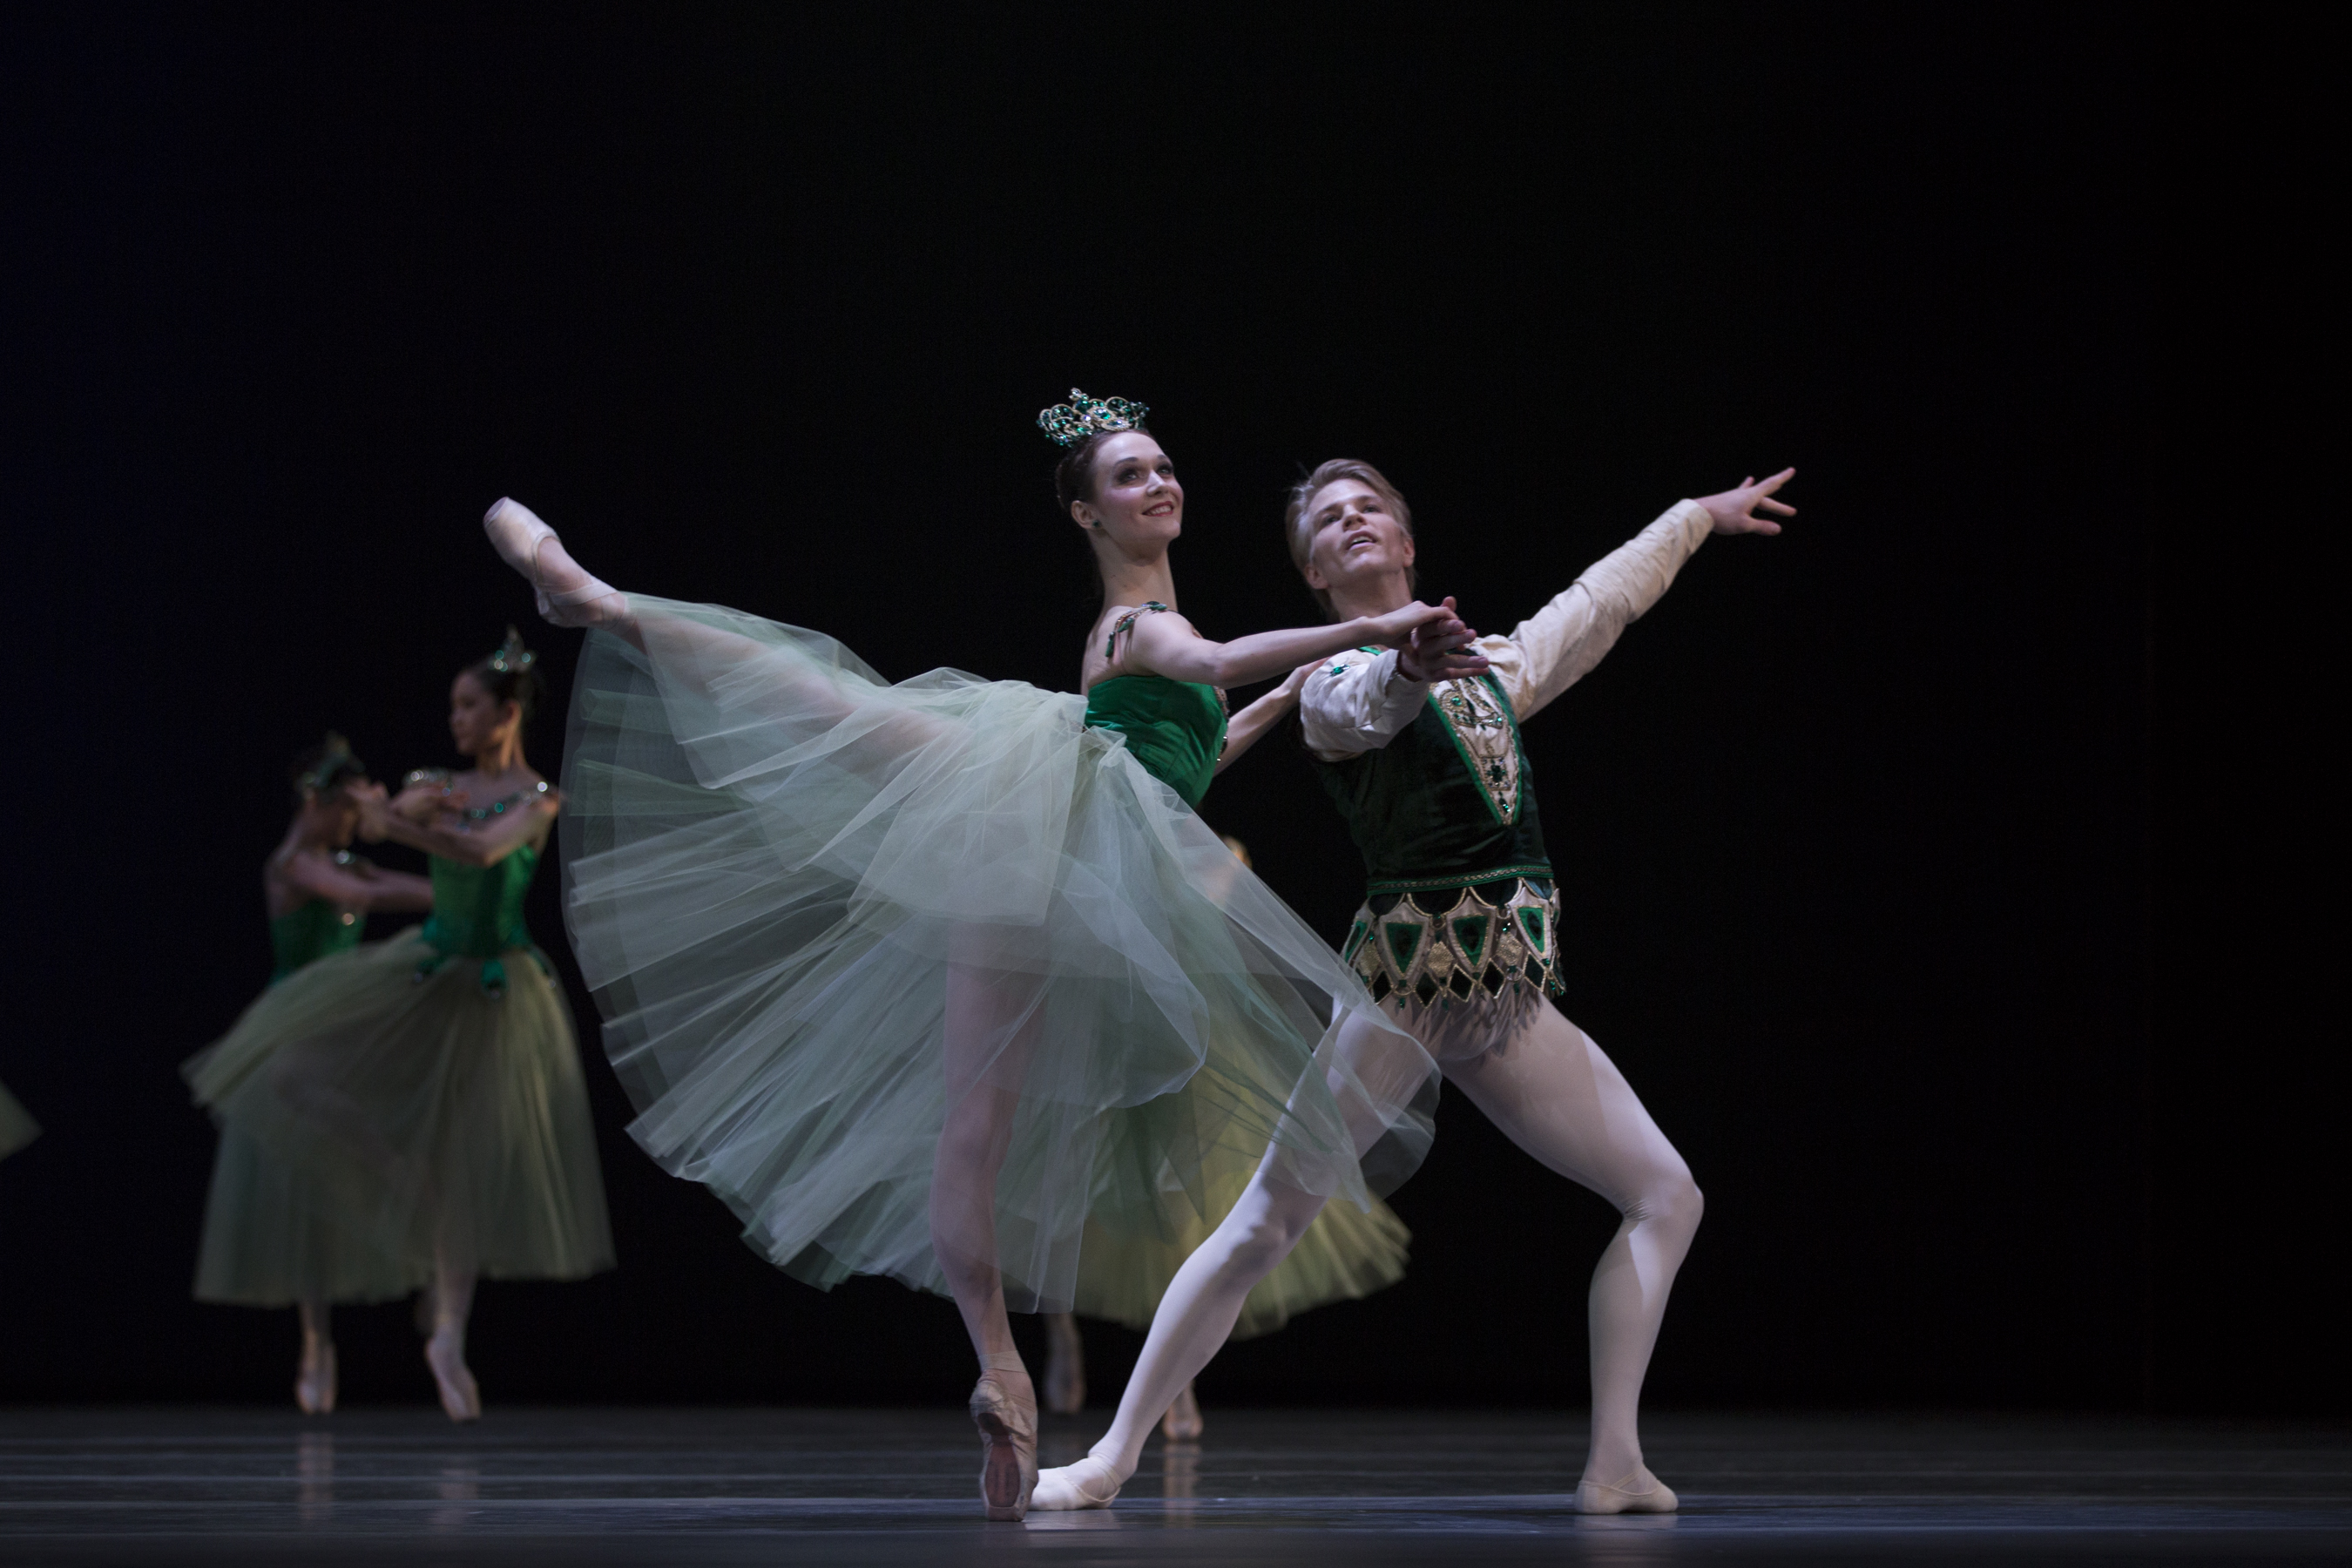 The sparkling trilogy Jewels by the Dutch National Ballet